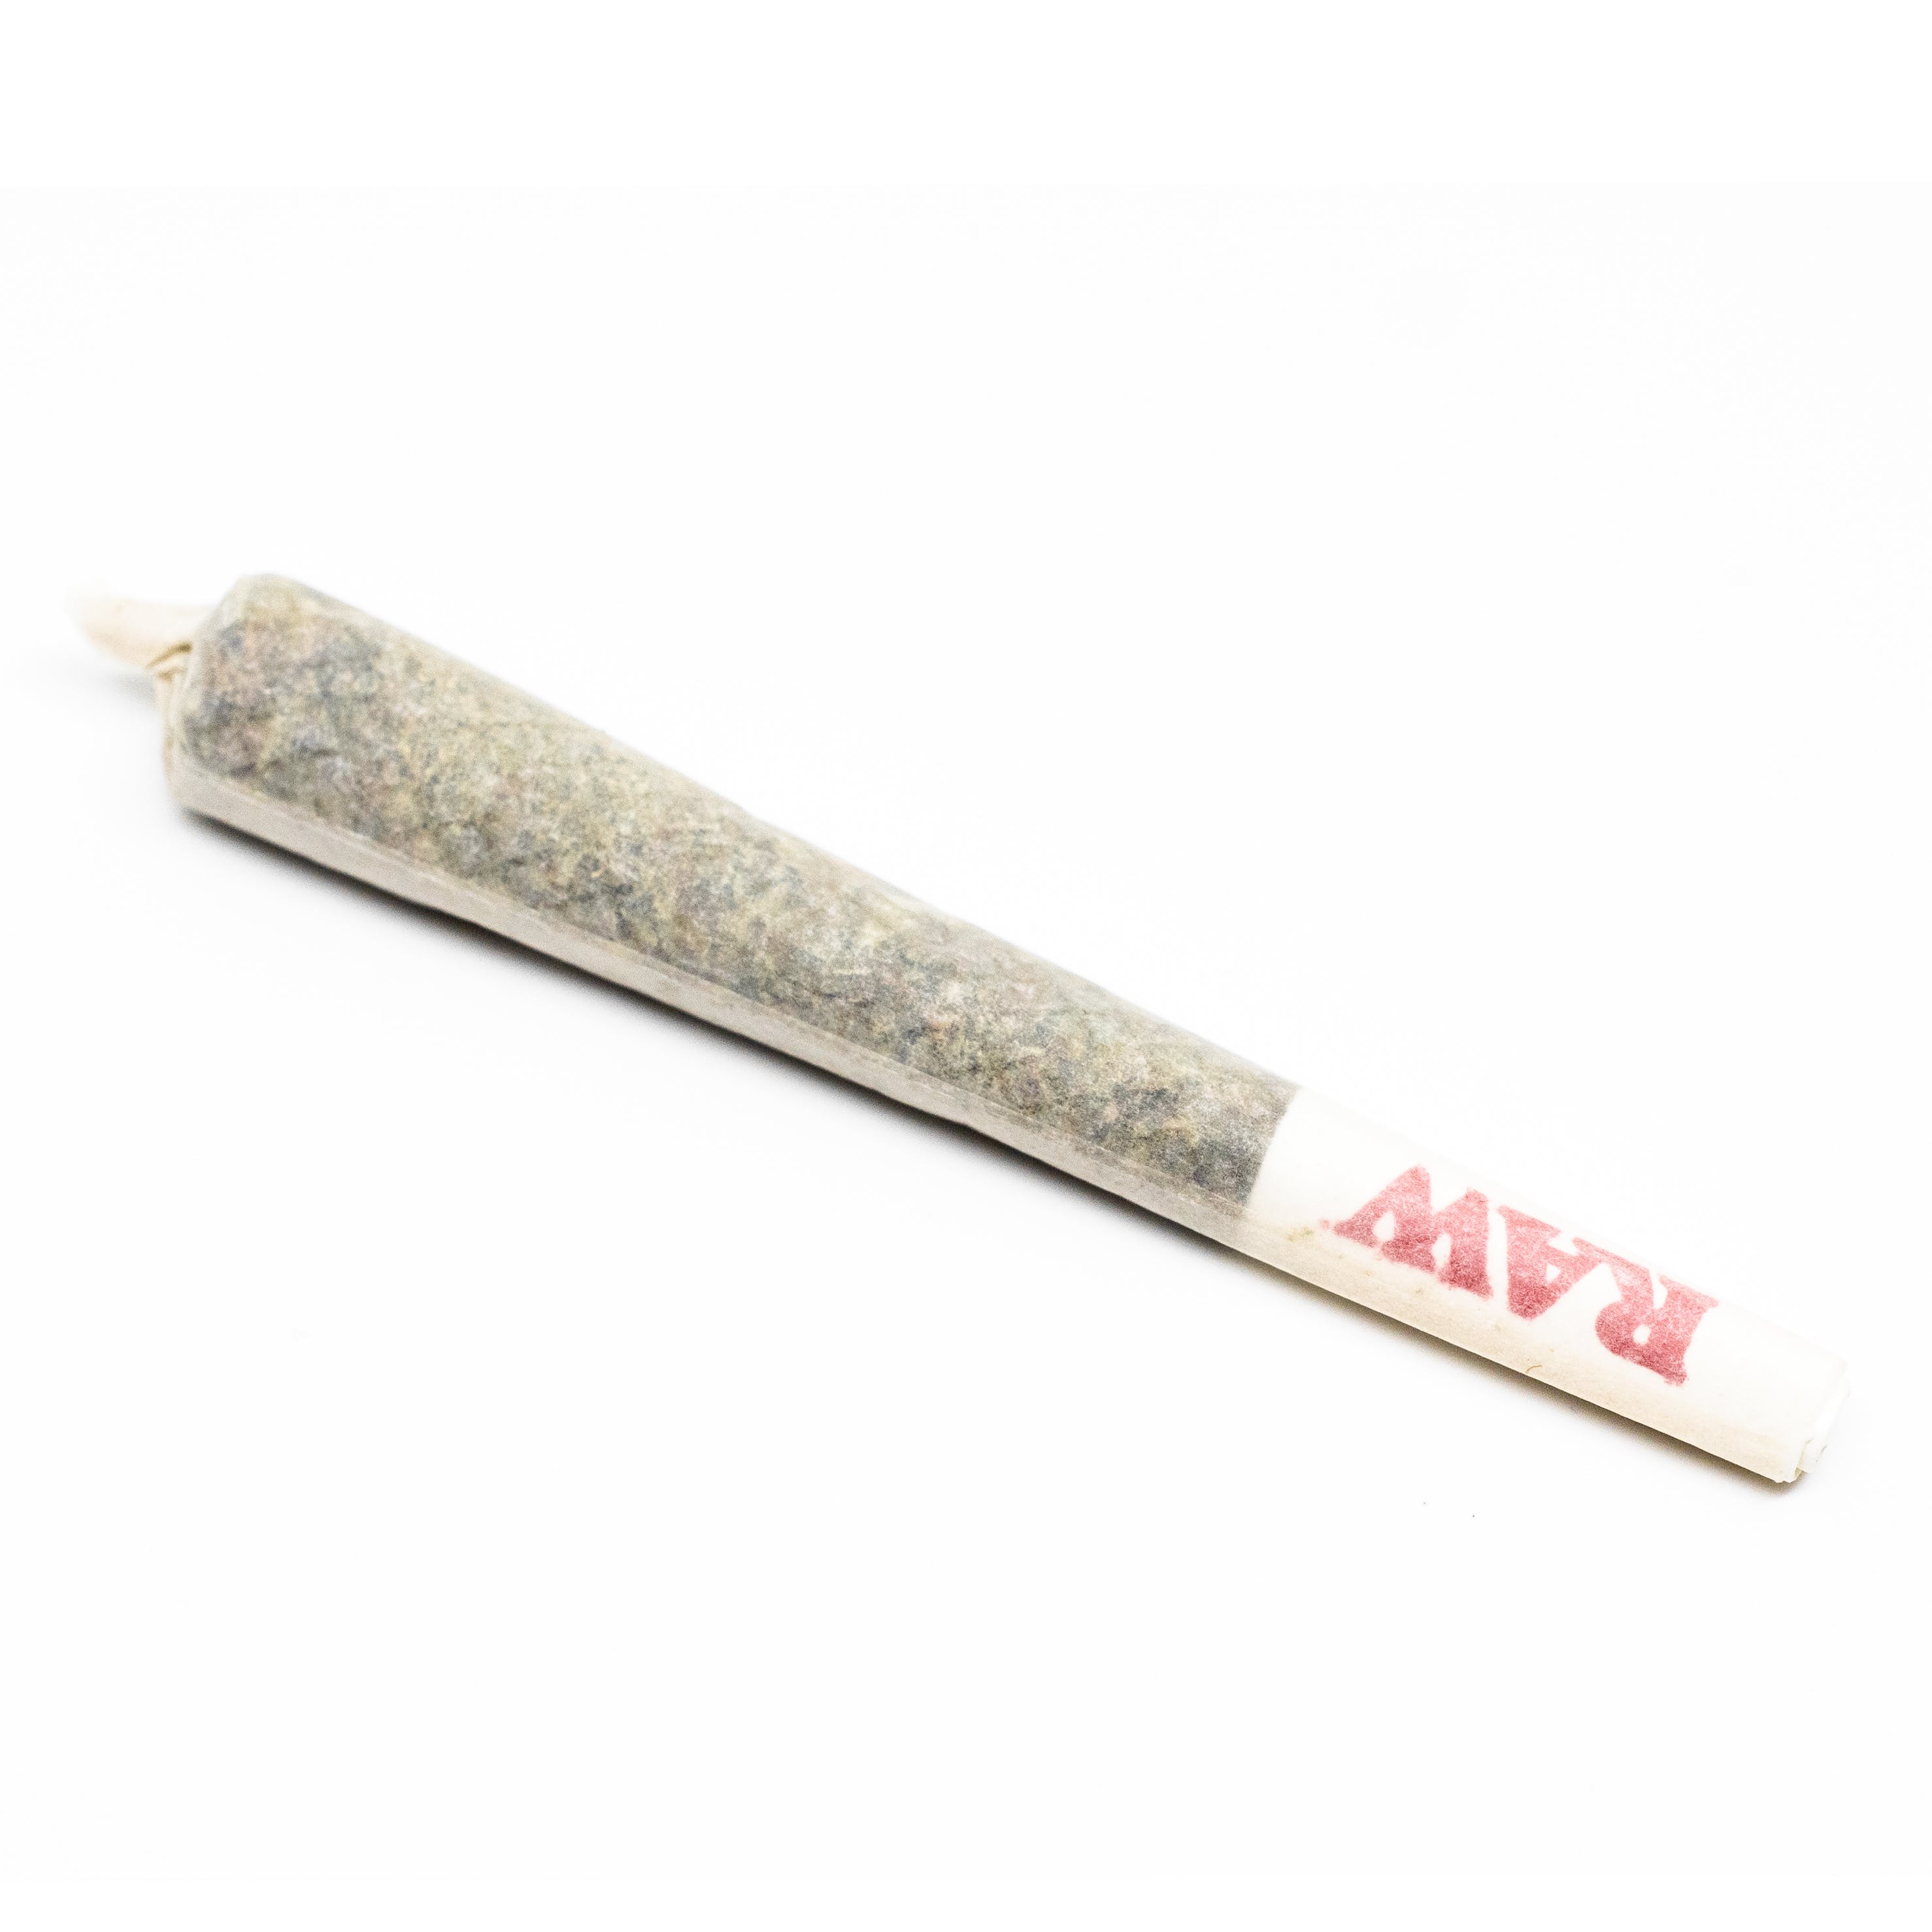 .5 Gram Pre-rolled Joint